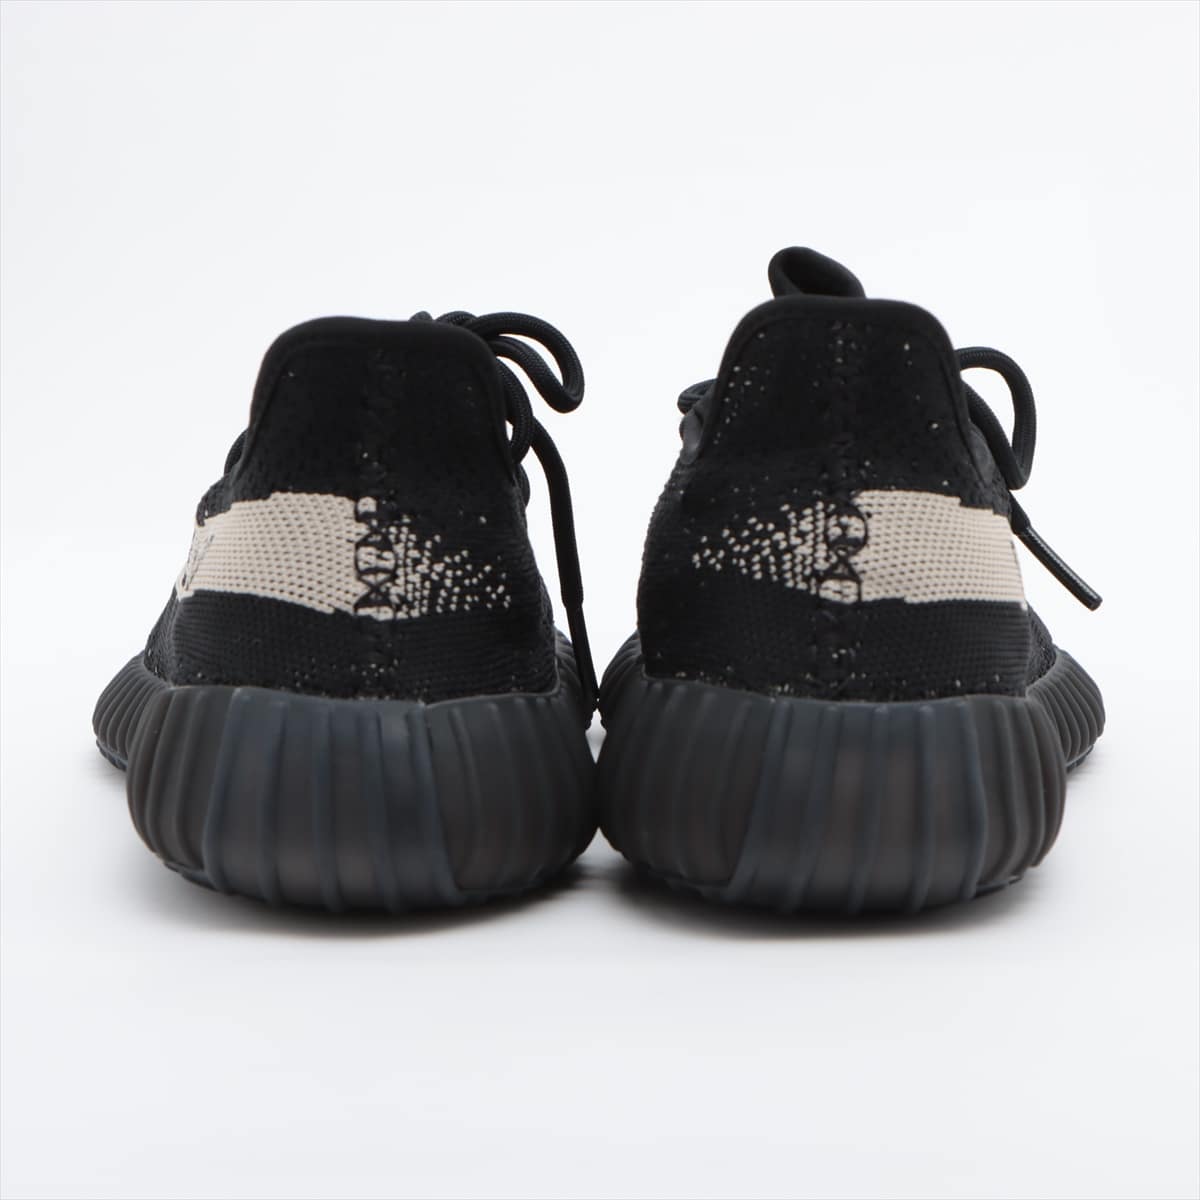 Adidas YEEZY BOOST 350 V2 Knit Sneakers 26㎝ Men's Black BY1604 OREO